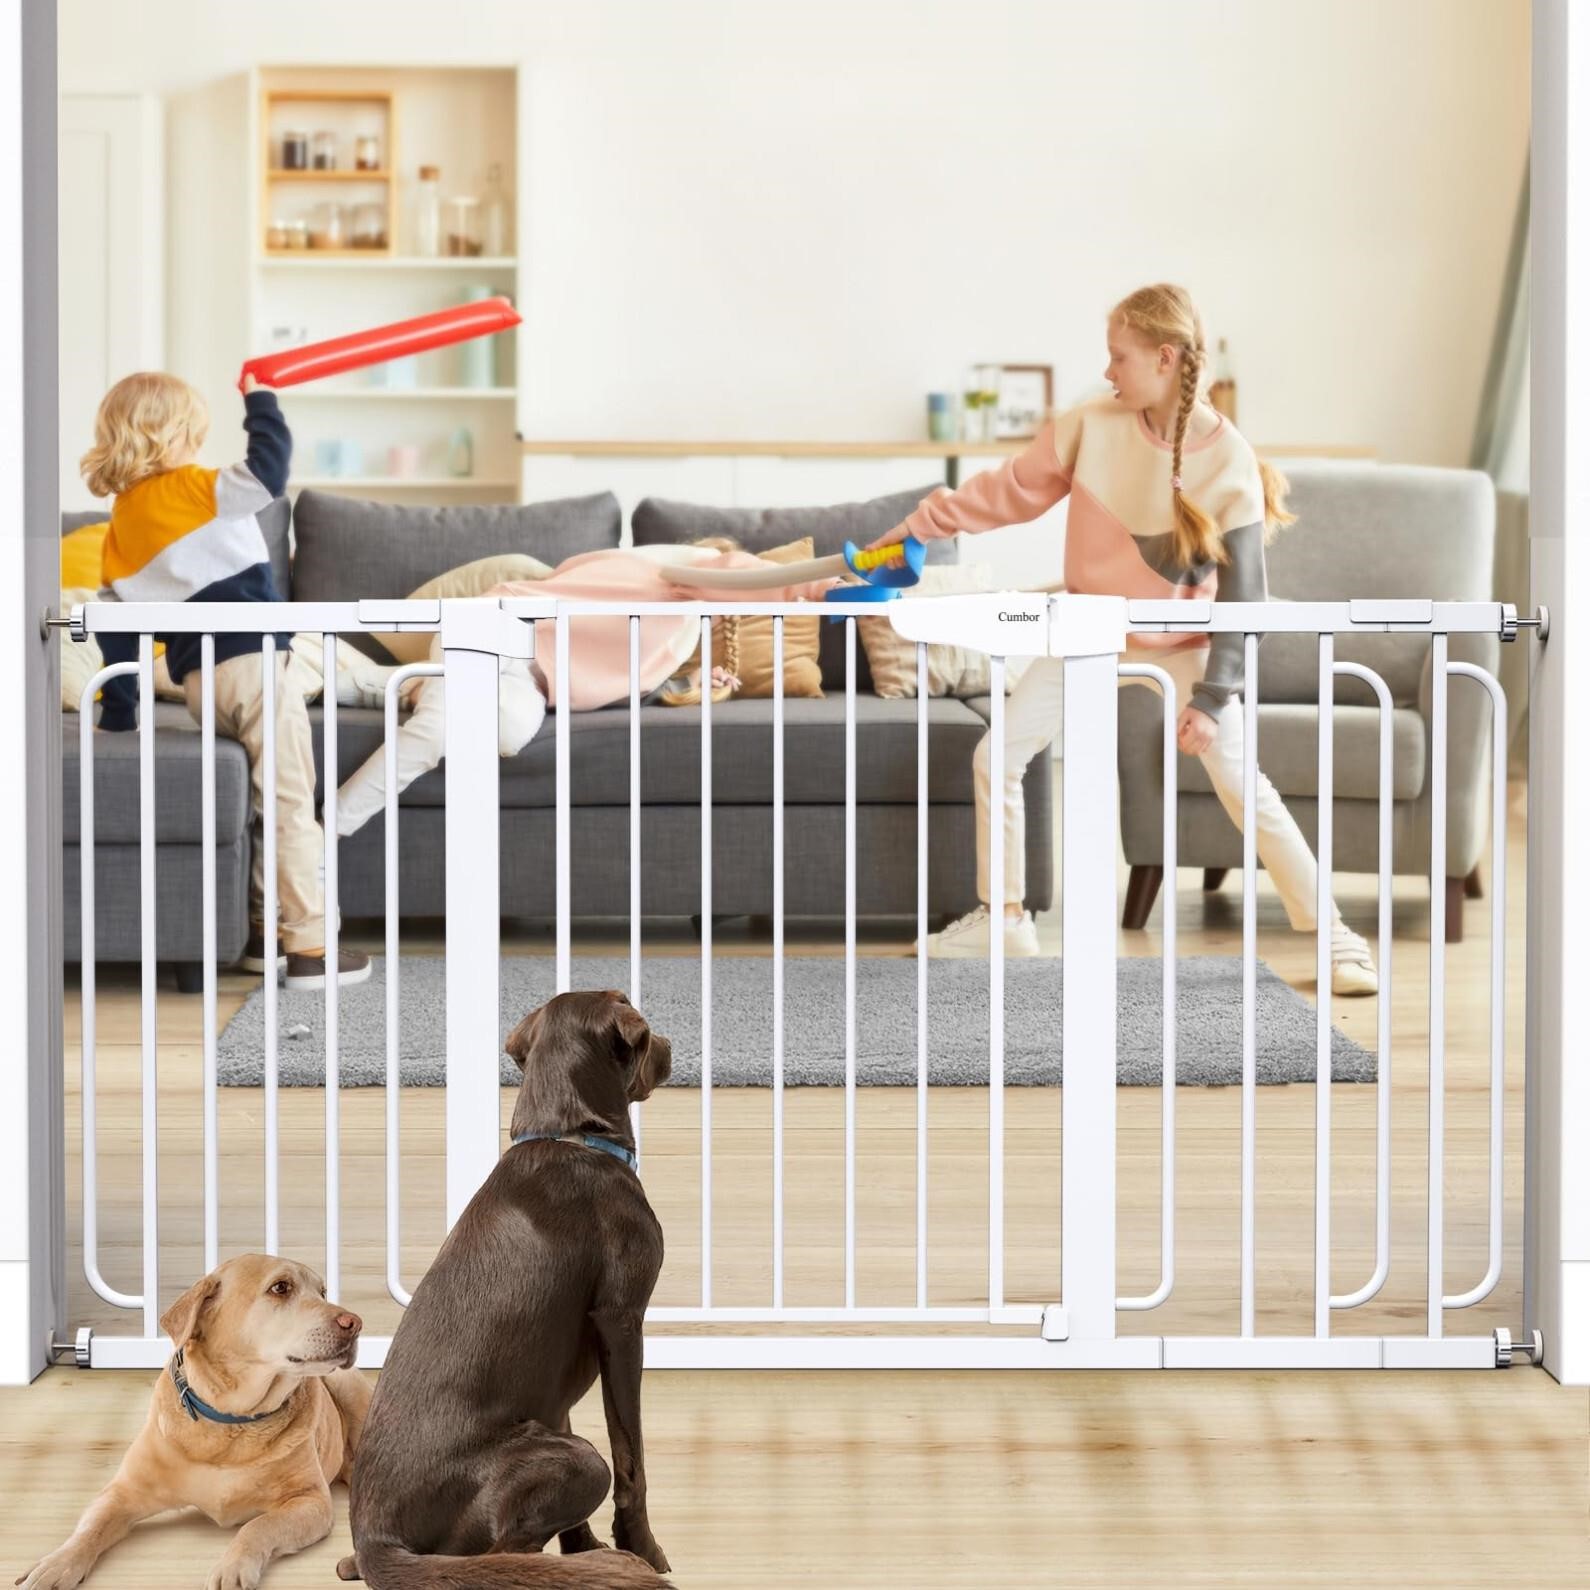 Cumbor 29.7-57" Extra Wide Baby Gate for Stairs, M